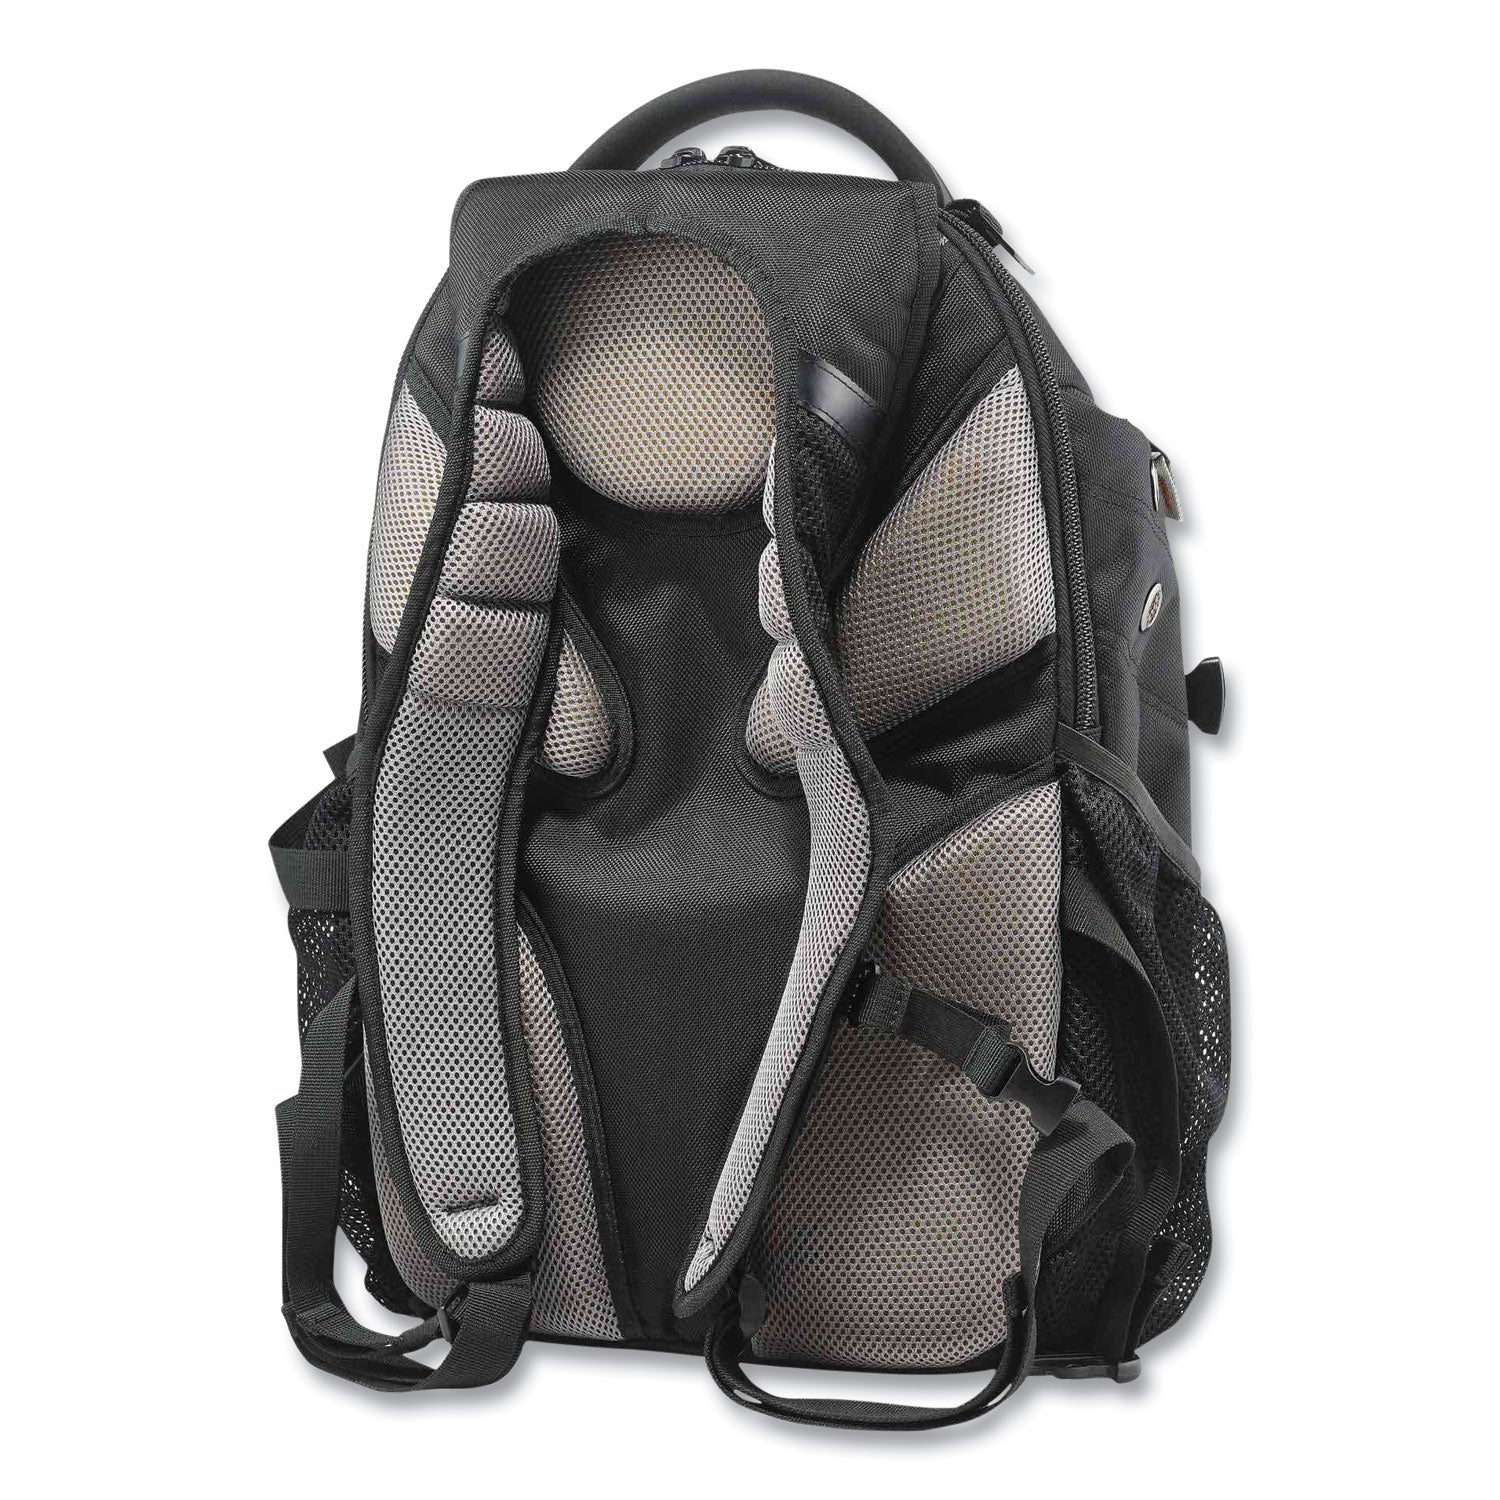 arsenal-5144-mobile-office-backpack-8-x-14-x-28-black-ships-in-1-3-business-days_ego13044 - 3